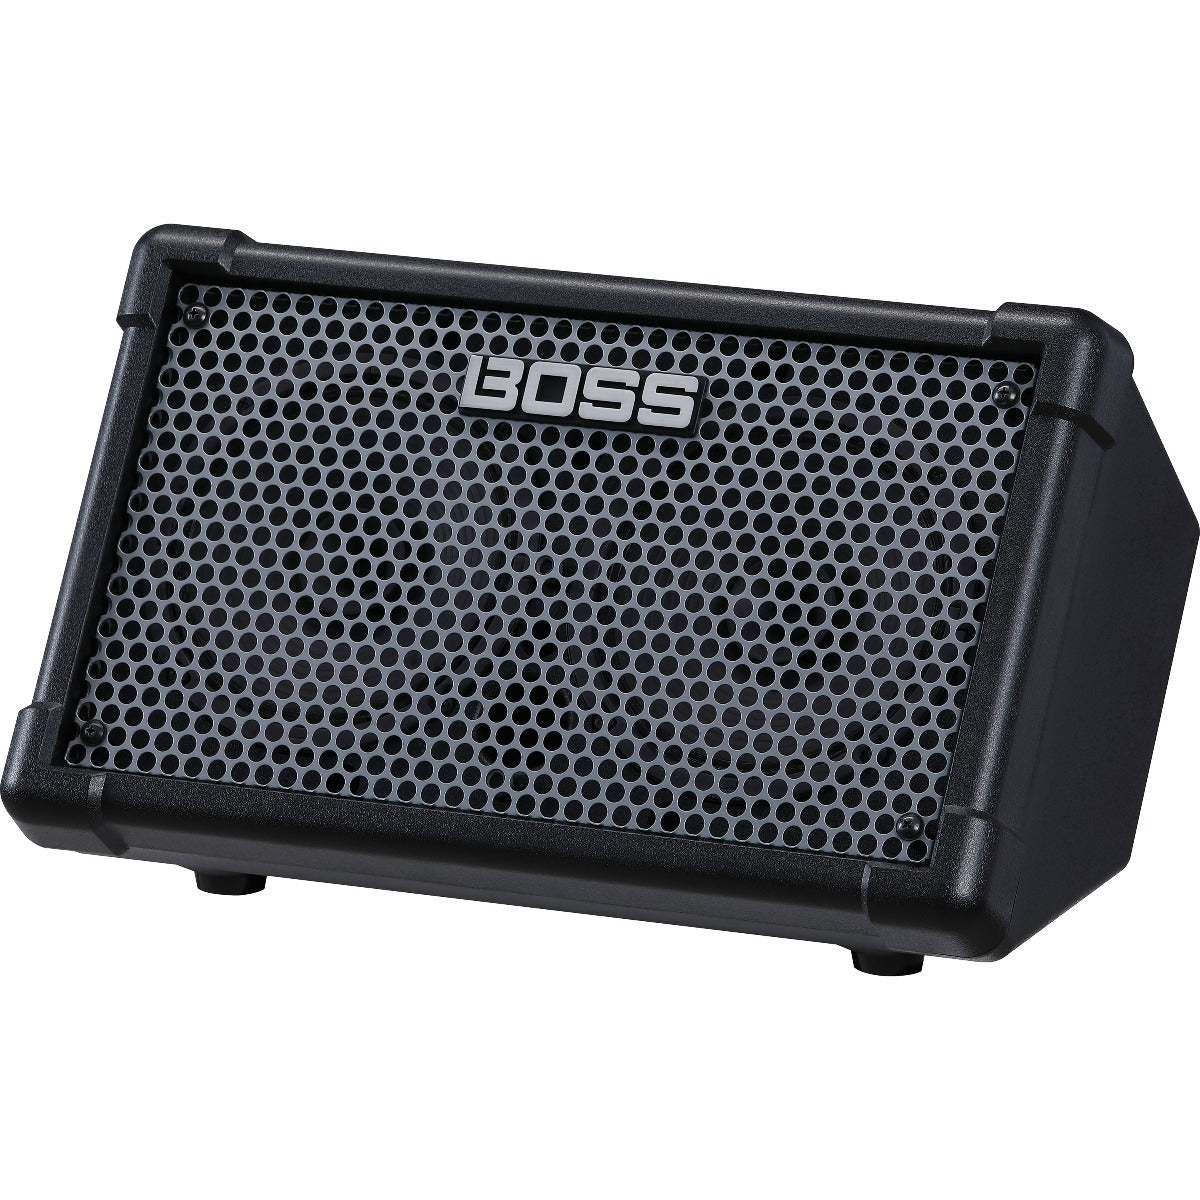 Perspective view of Boss Cube Street II Battery-Powered Stereo Amplifier - Black showing front and right side